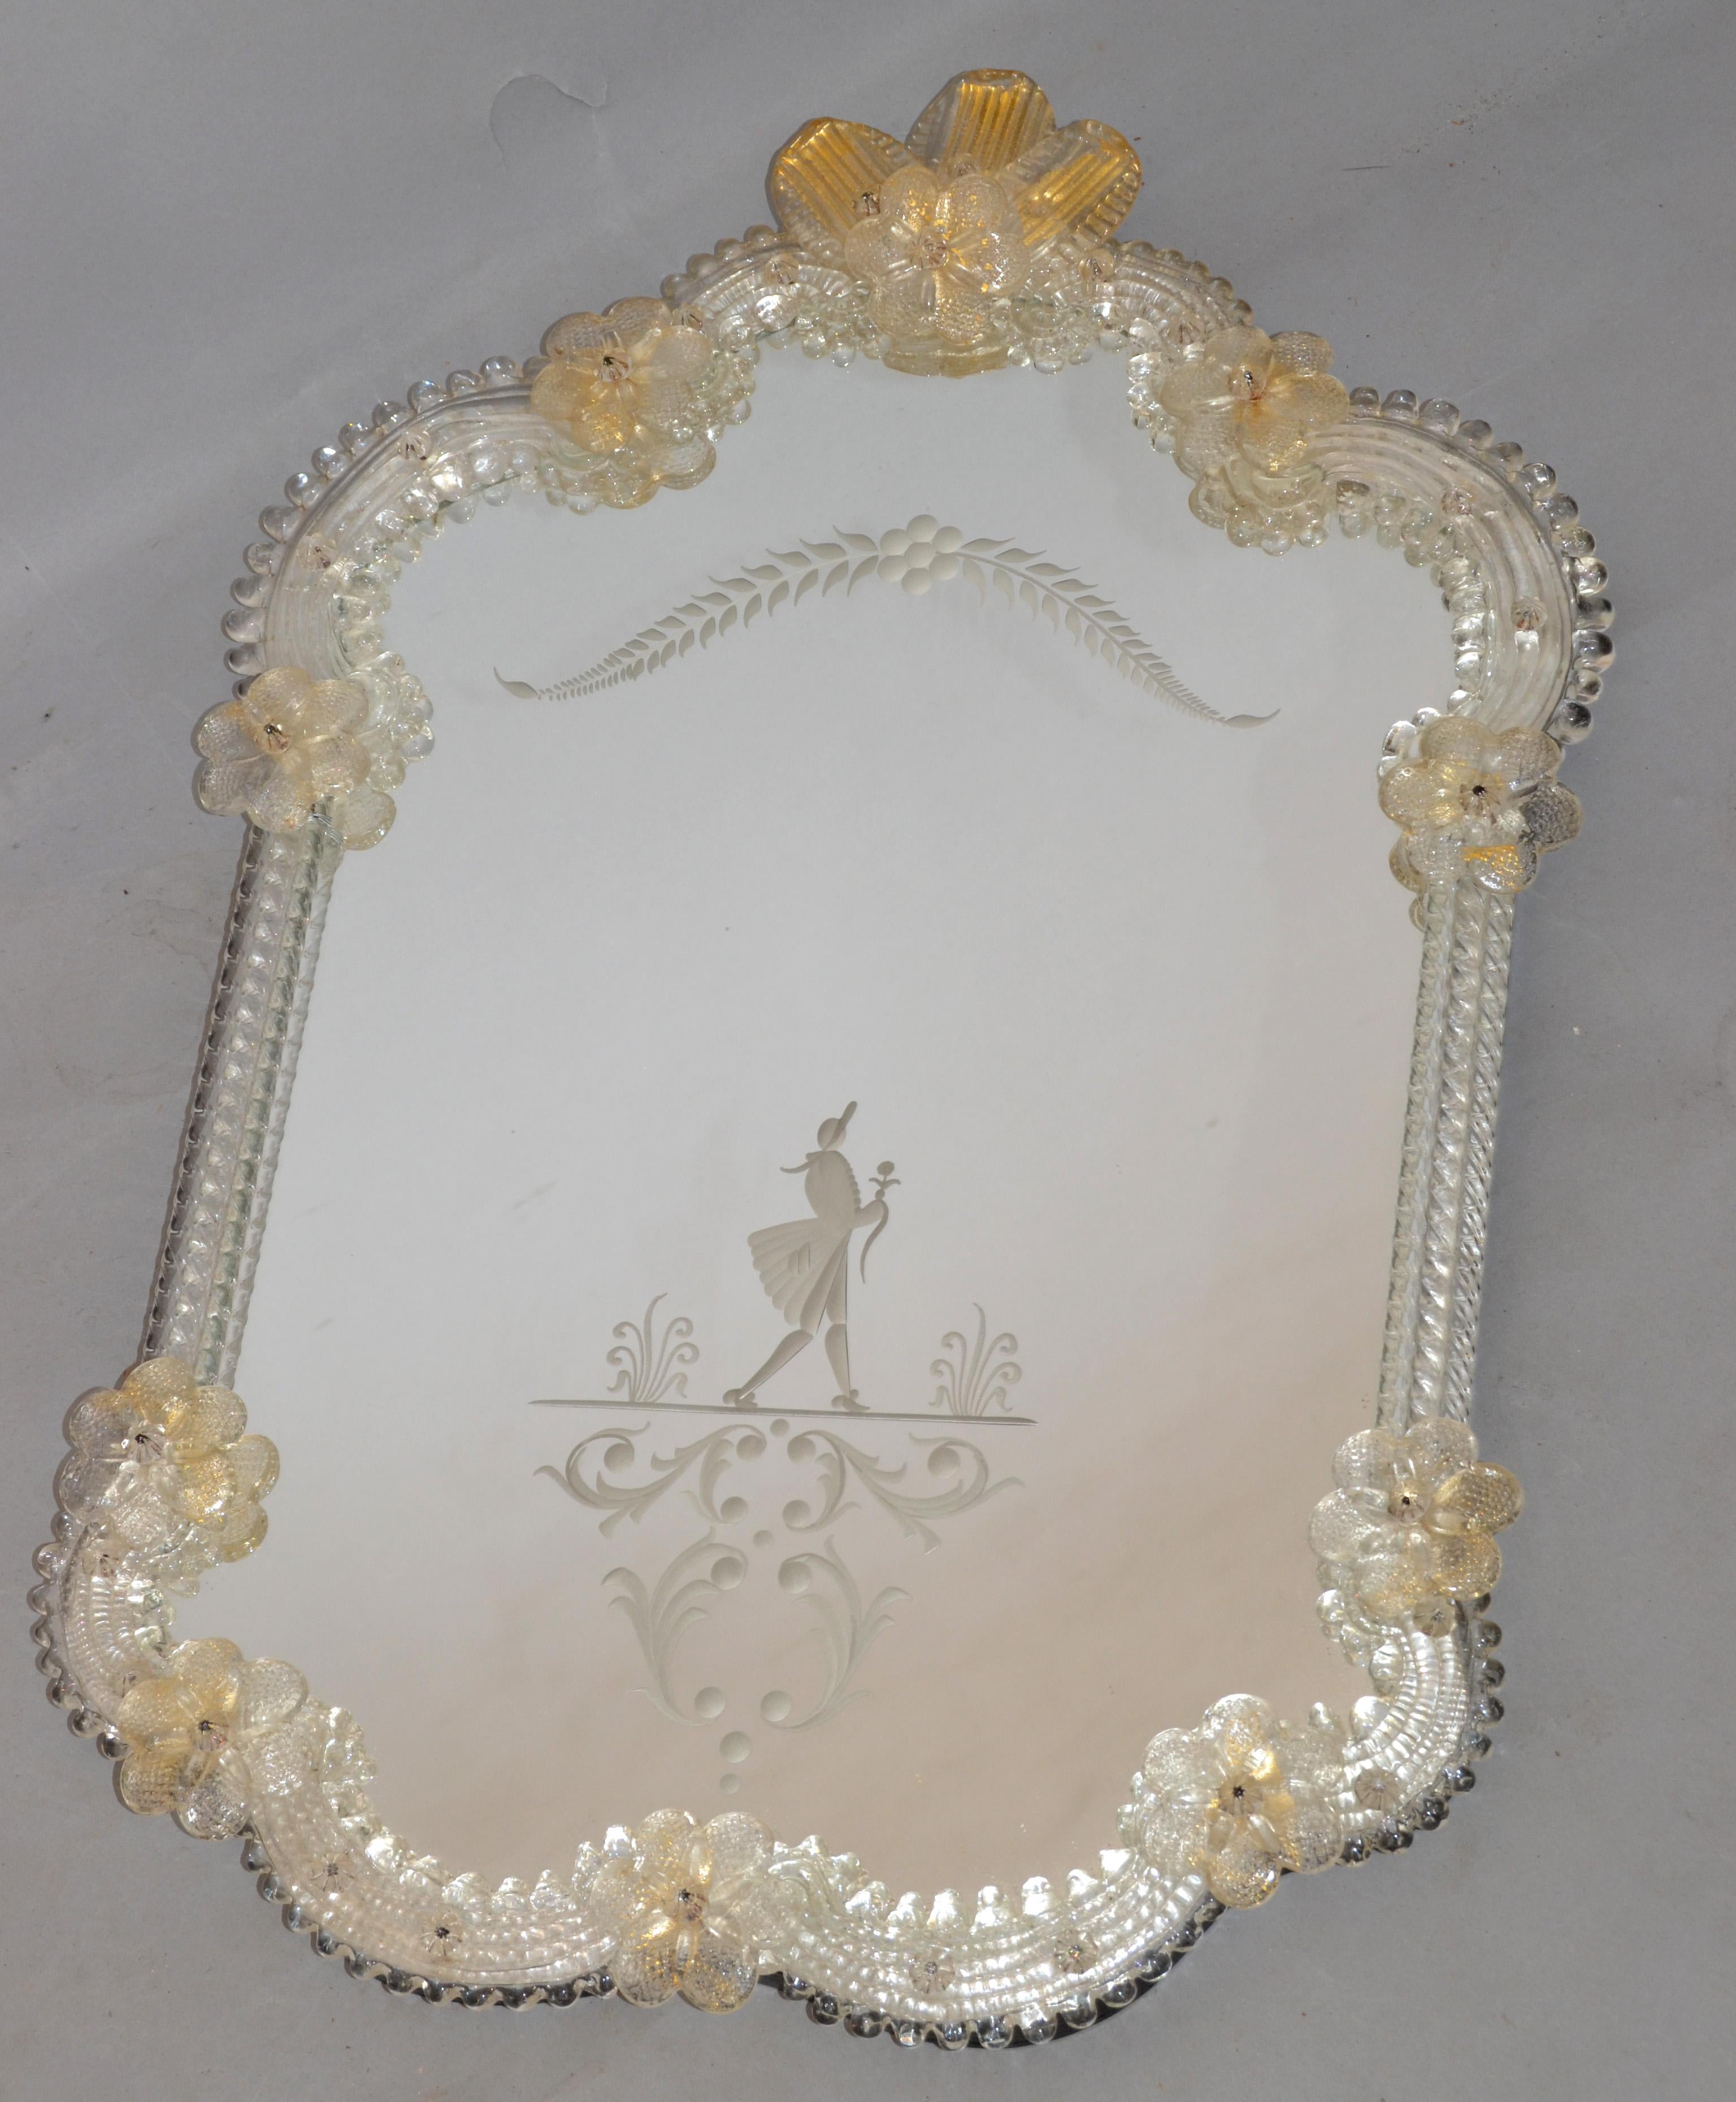 Gold Leaf Rococo Revival Him and Her Etched Venetian Wall Mirror Bohemian Golden Flowers For Sale